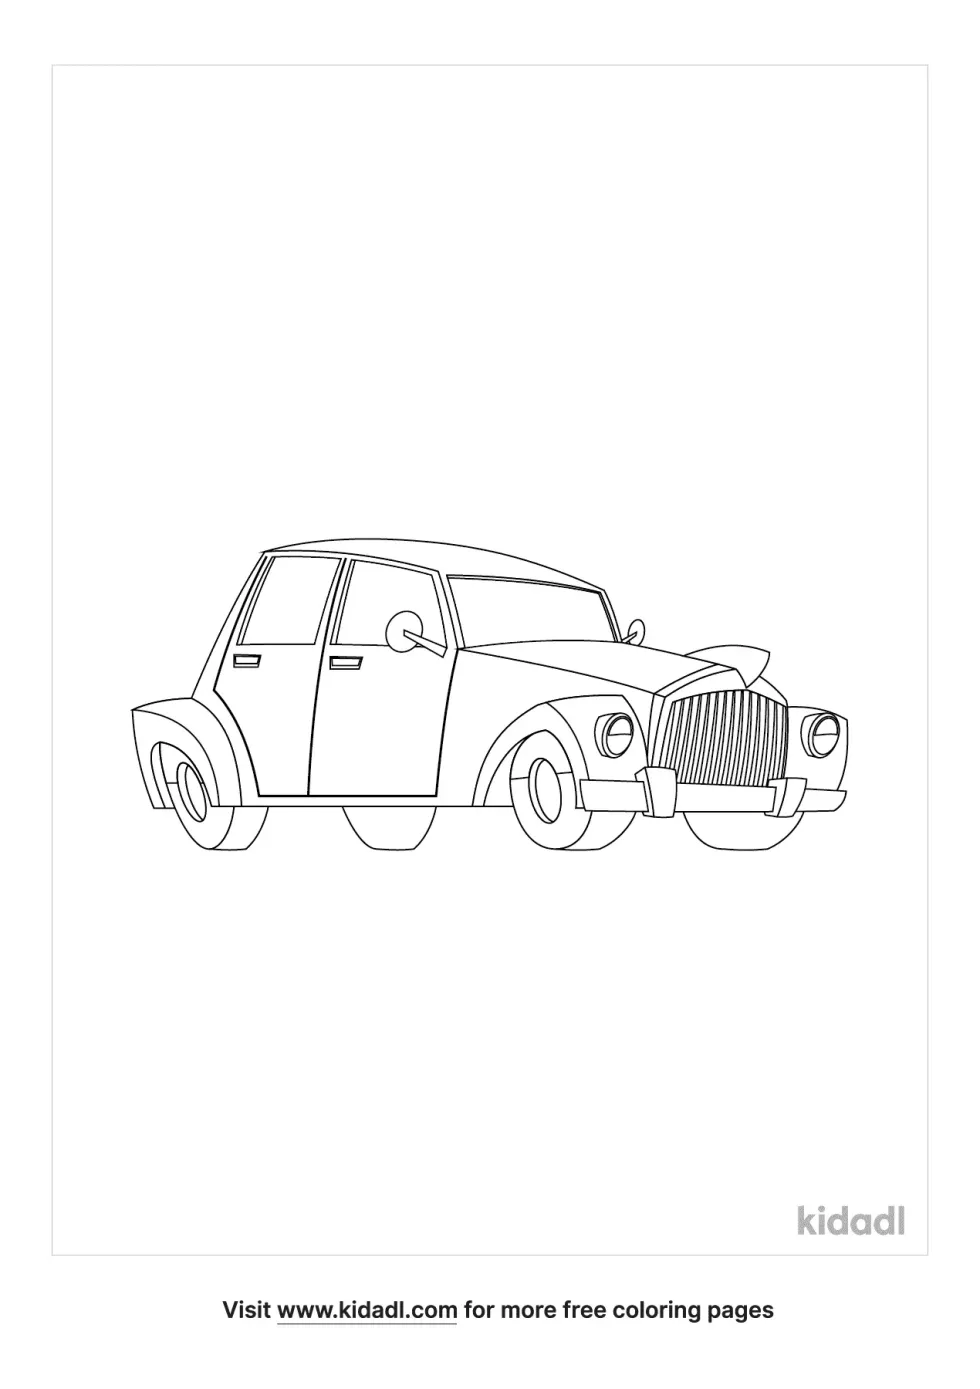 1949 Cars Coloring Page